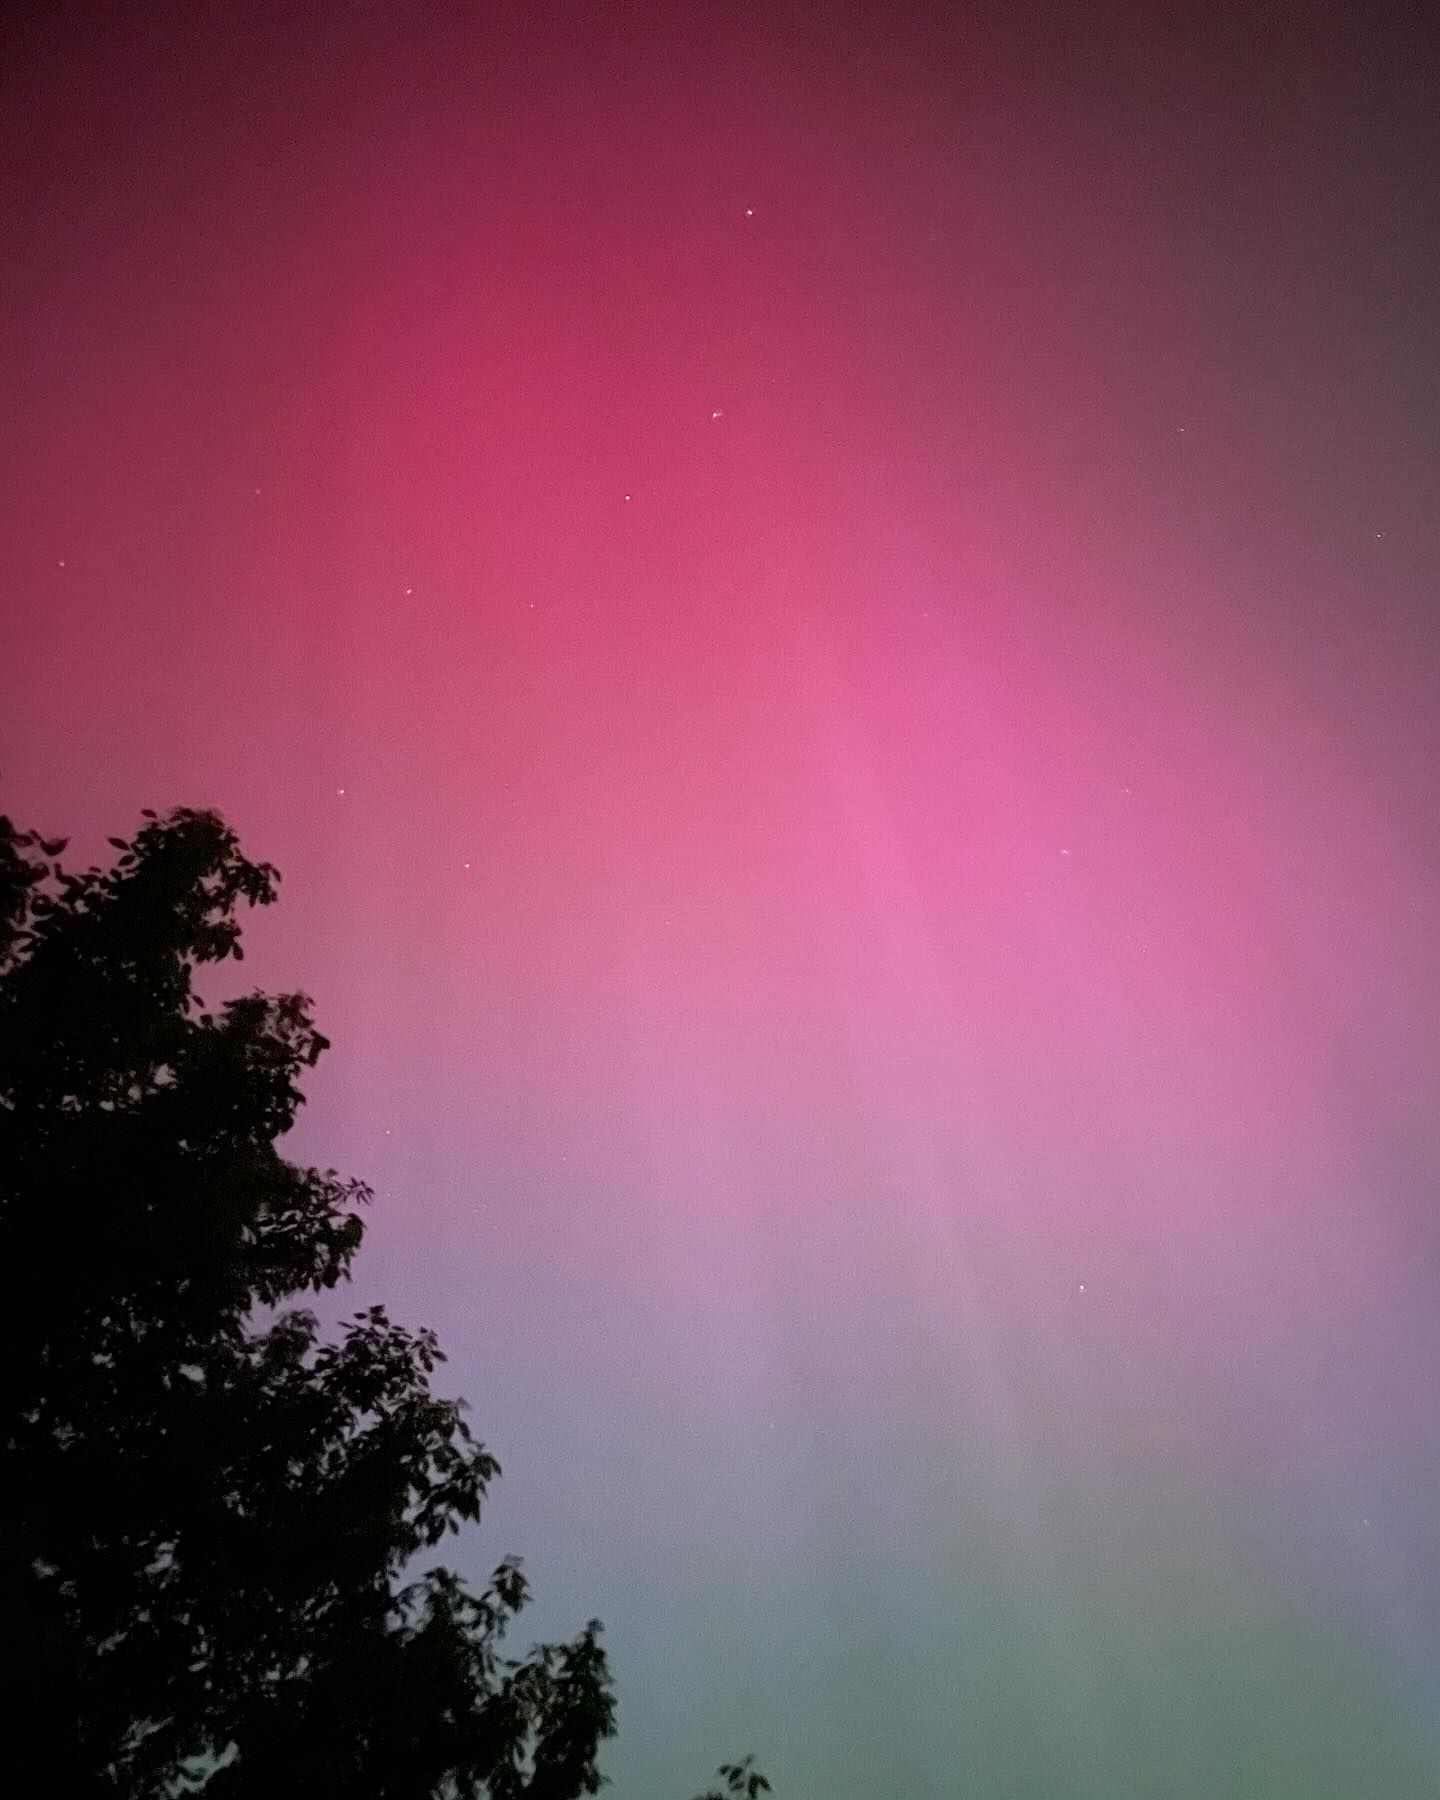 The skies of Essex, England tonight. With my Aurora, @kotrynamorkute 

Grandad, you would have loved this and I would have adored to have been able to spend this moment with you. 💫